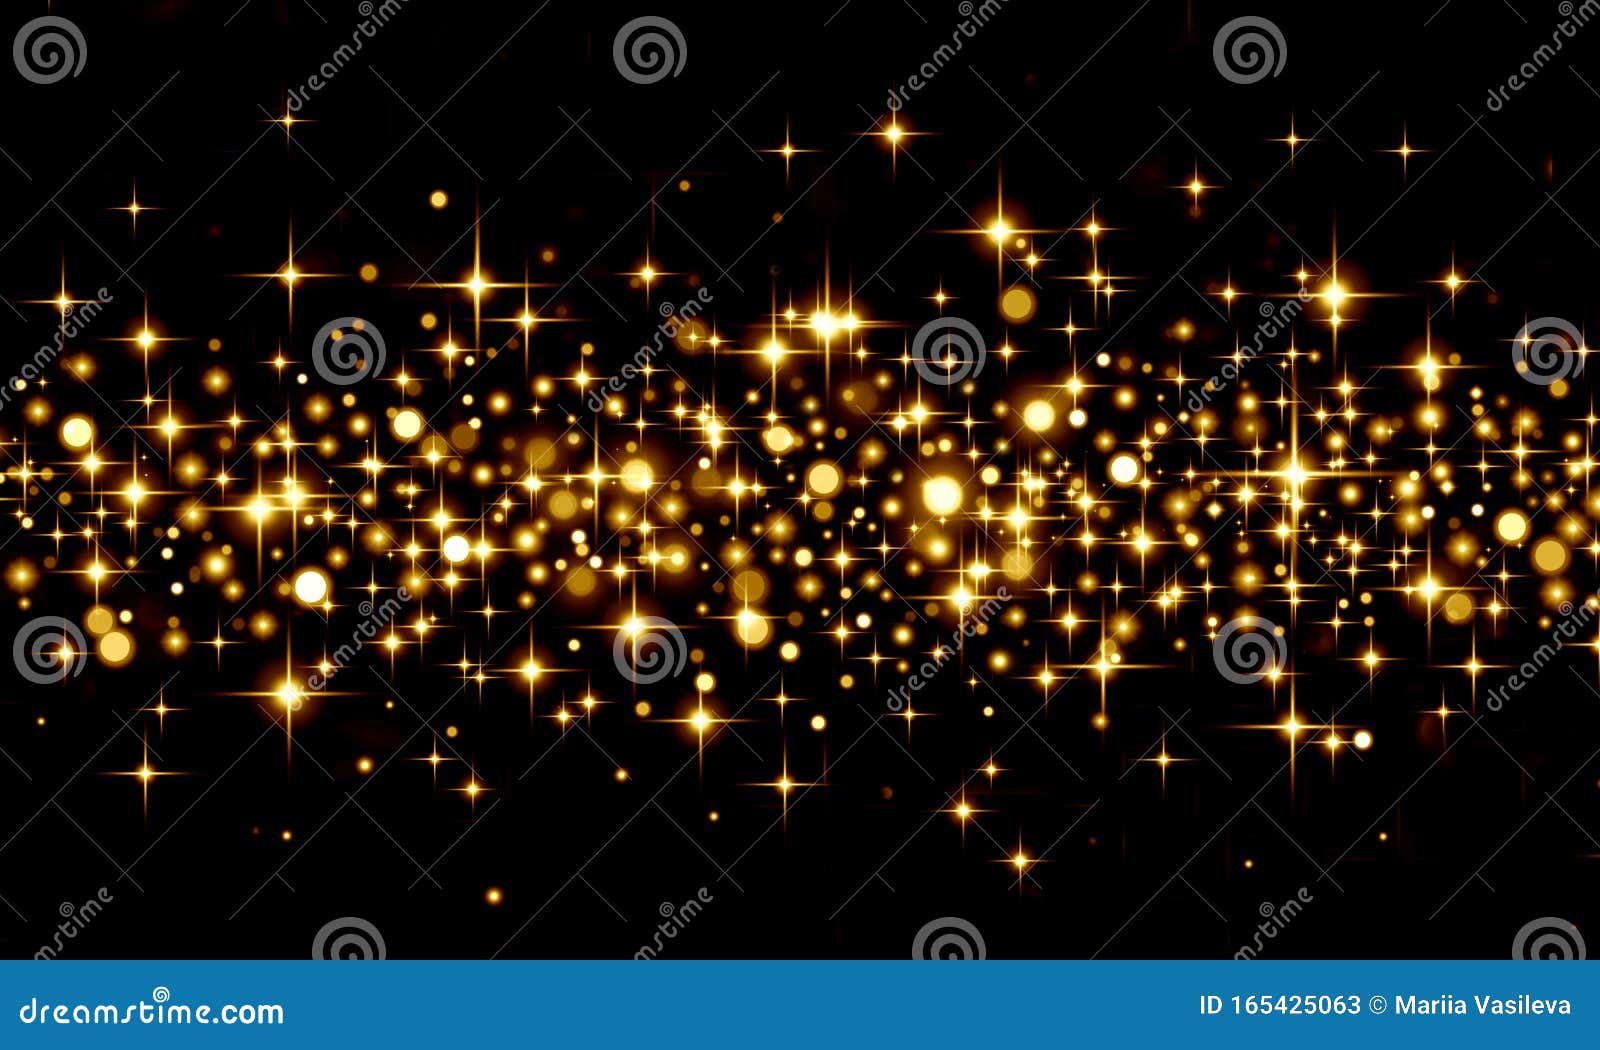 gold confetti on black background, holiday, christmas, party, gold, circles, stars, bokeh, glitter, star shine, lights